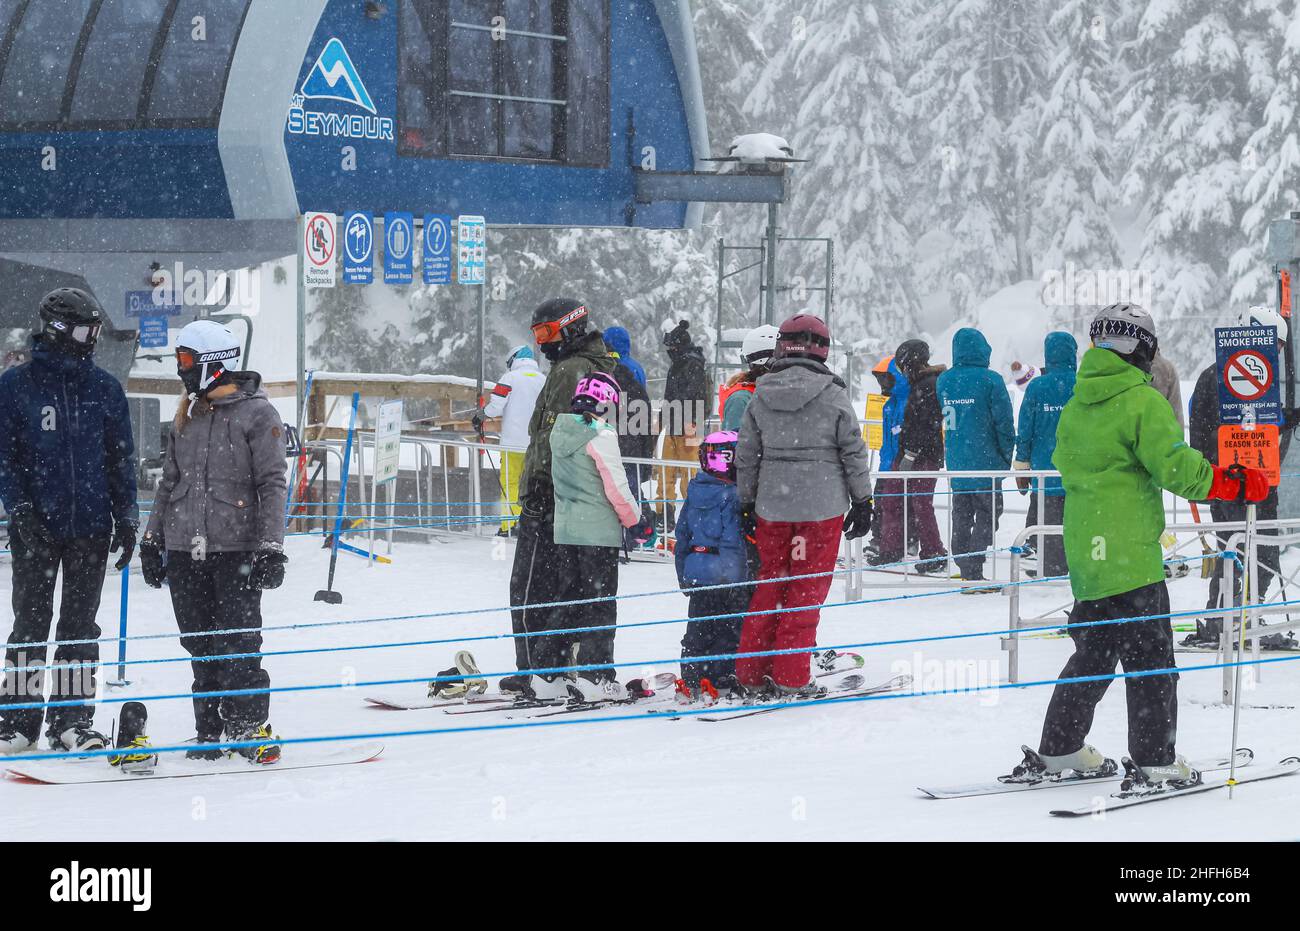 Skiers in ski region standing in line in front of a lift station at Mt Seymour Ski Resort BC, Canada-February 4,2021. Street view, travel photo, Stock Photo